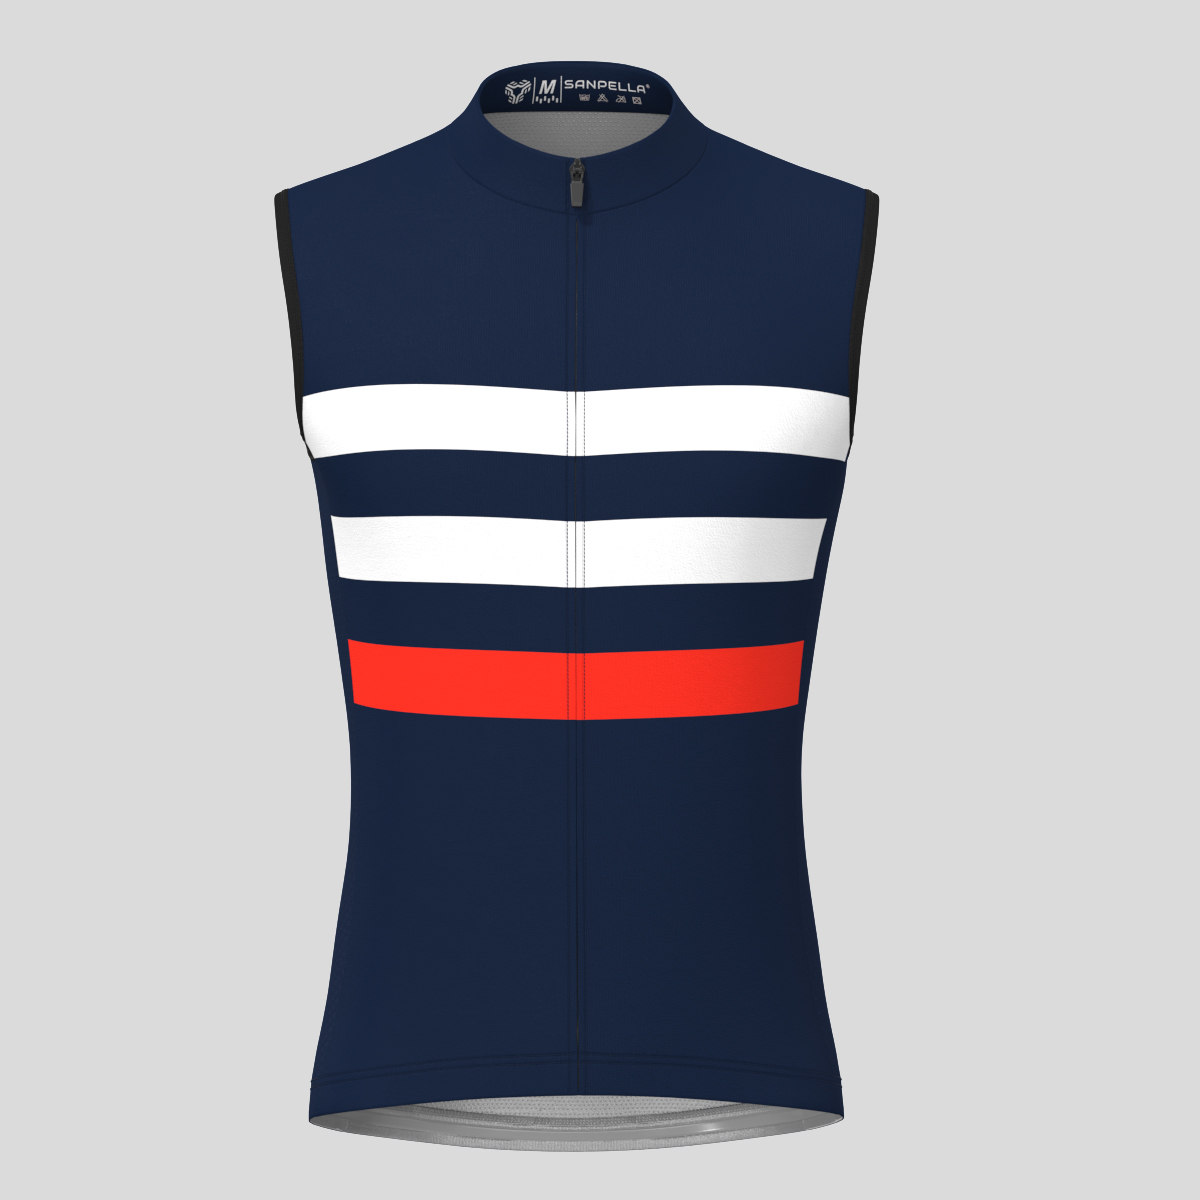 Men's Classic Stripes Sleeveless Cycling Jersey - Navy/White/Red